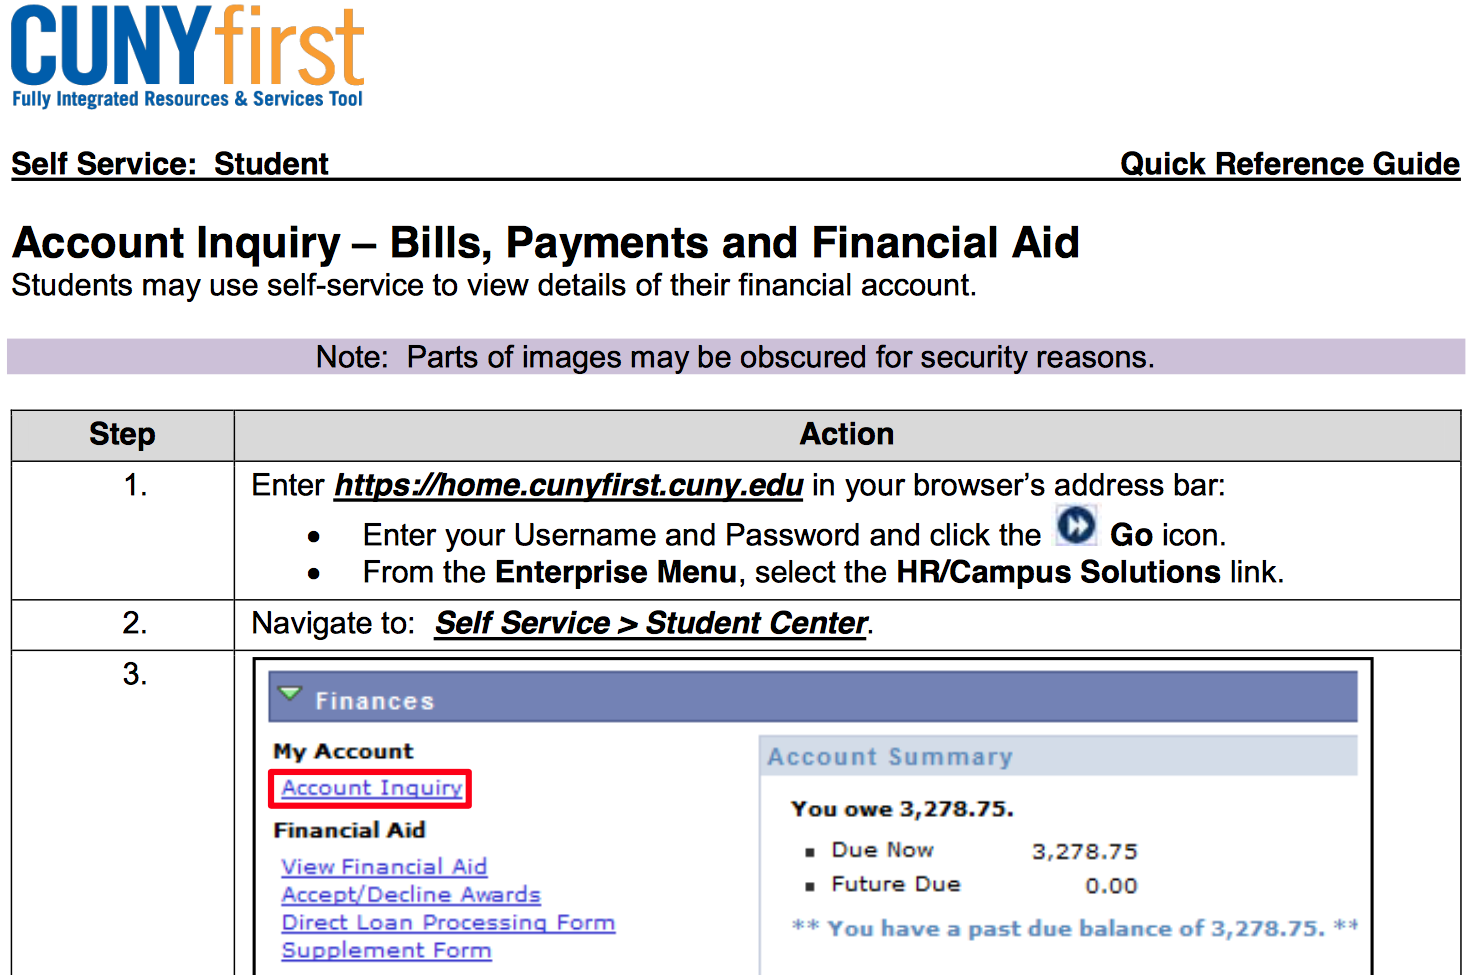 Account Inquiry - Bills, Payments and Financial Aid